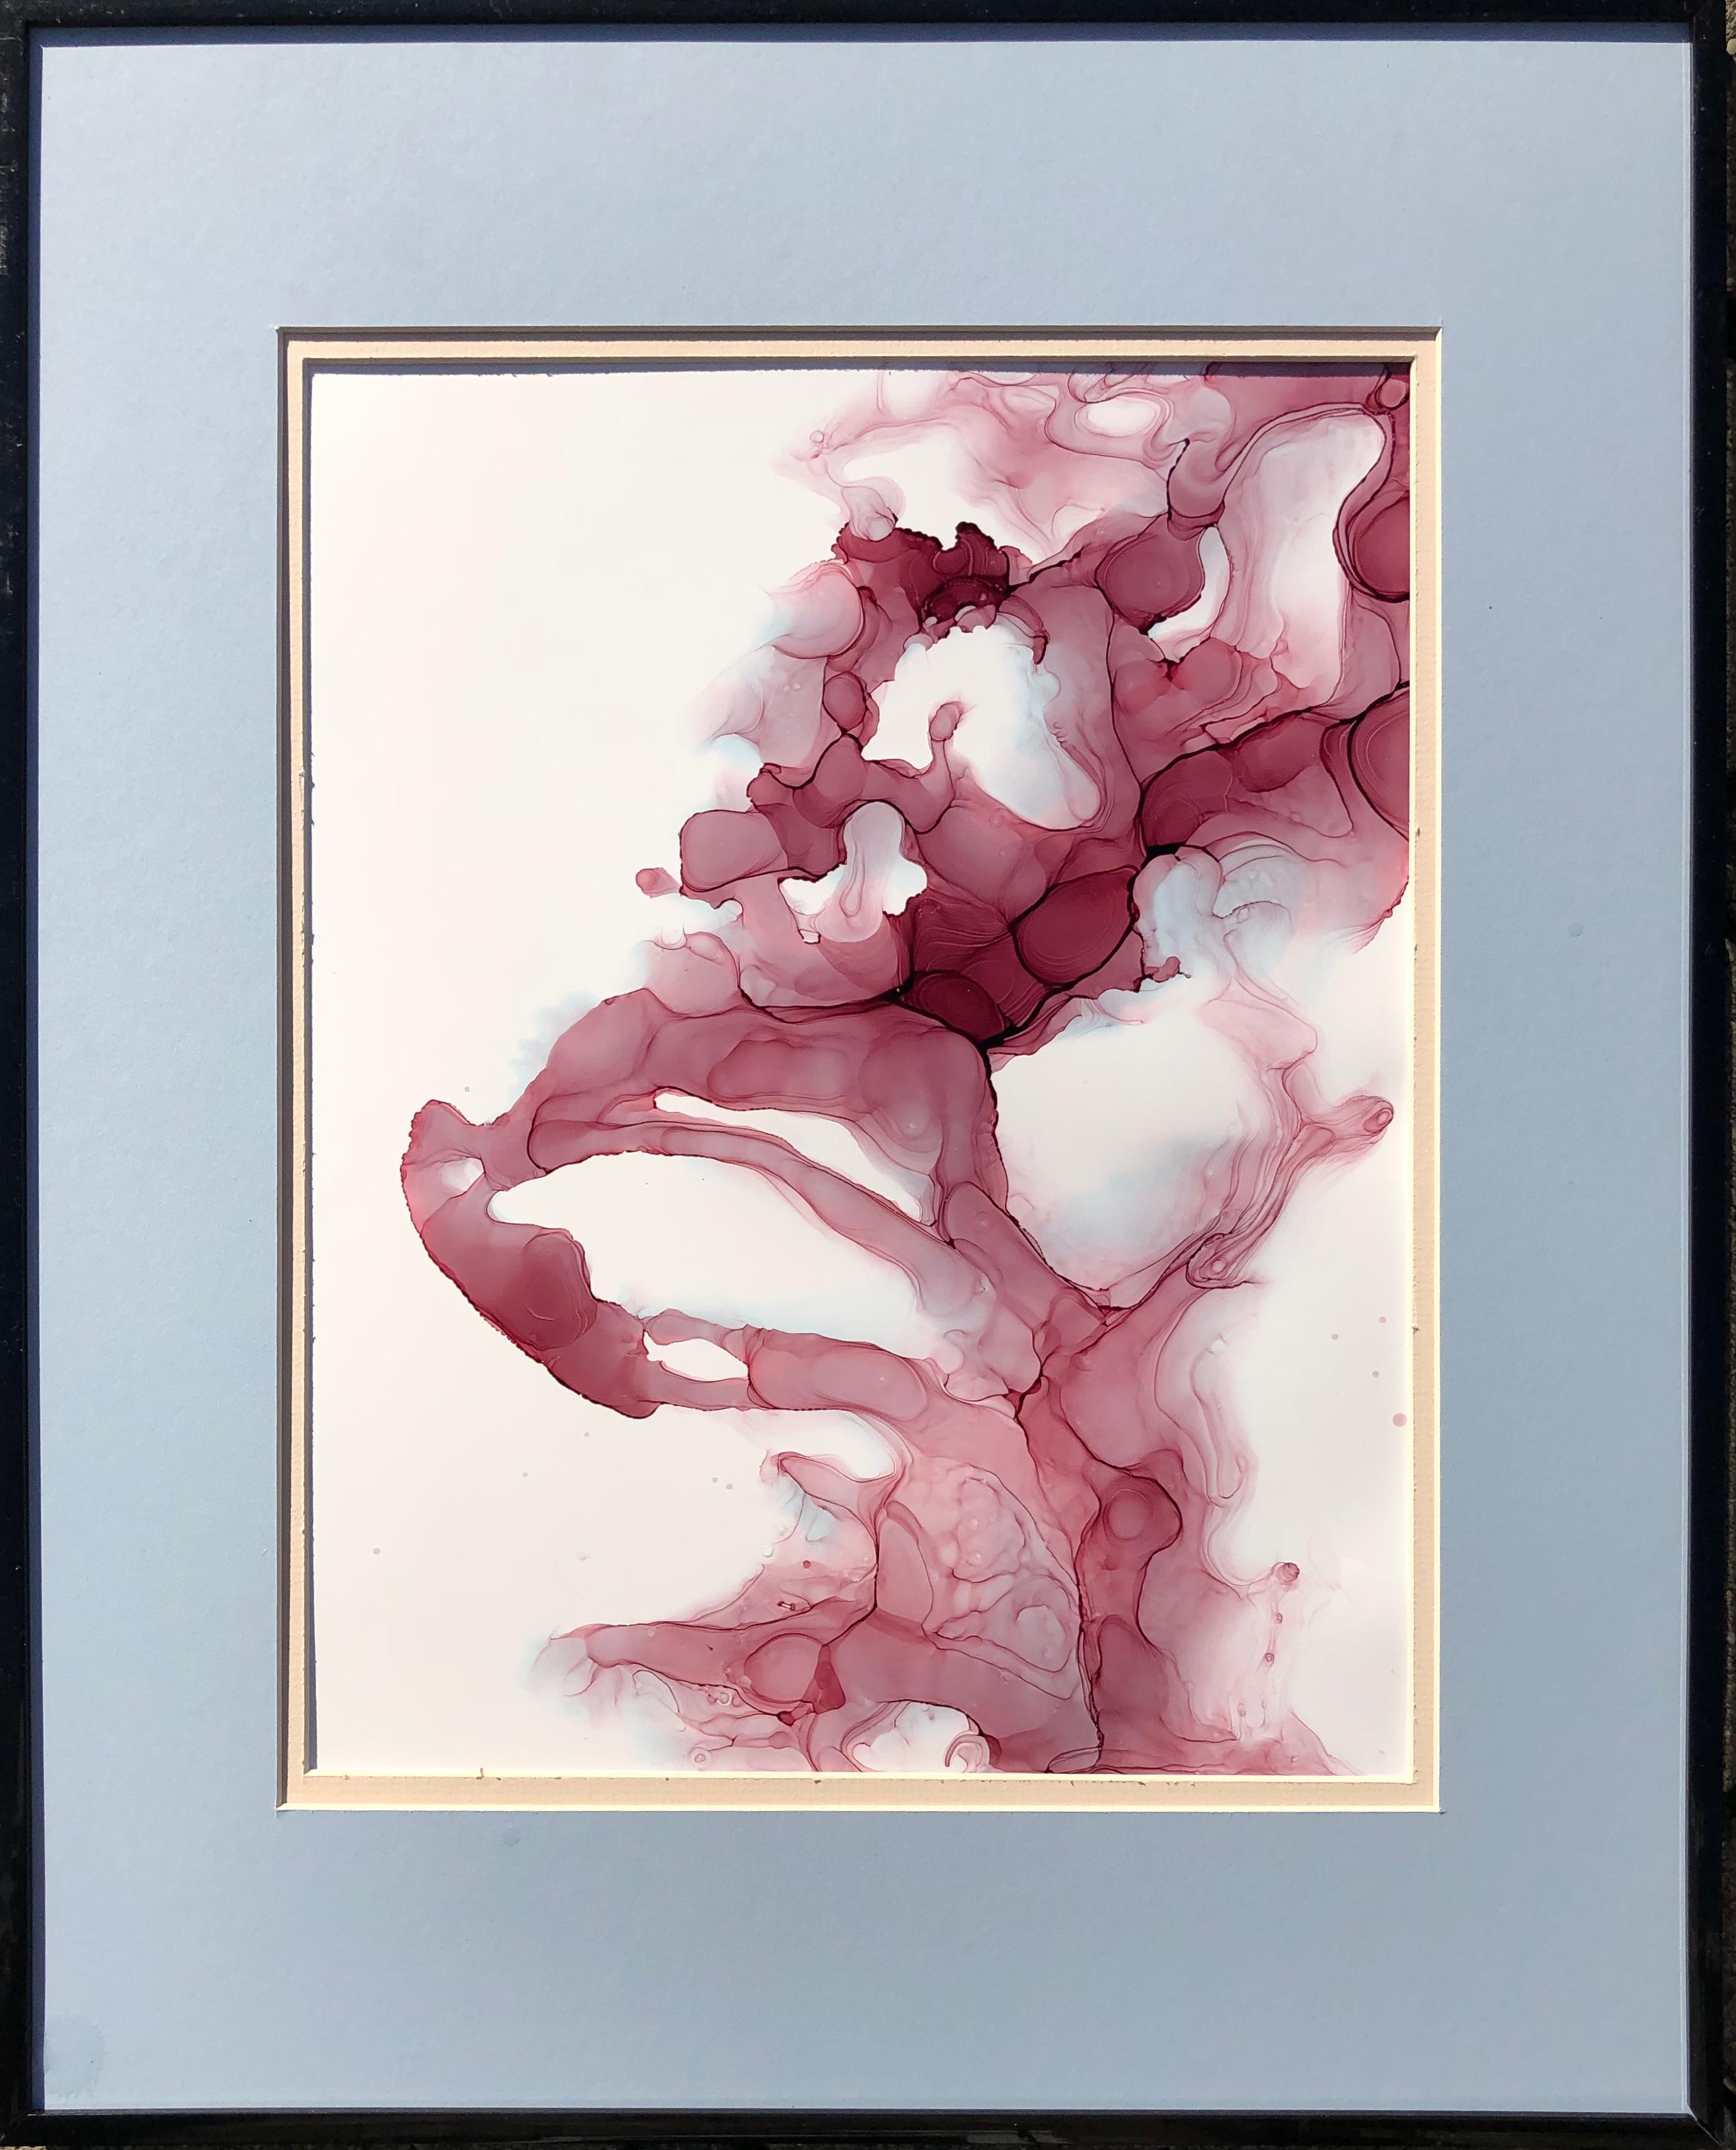 Line of fate-abstraction art, made in pale pink, light blue, rose colored - Abstract Expressionist Art by Mila Akopova